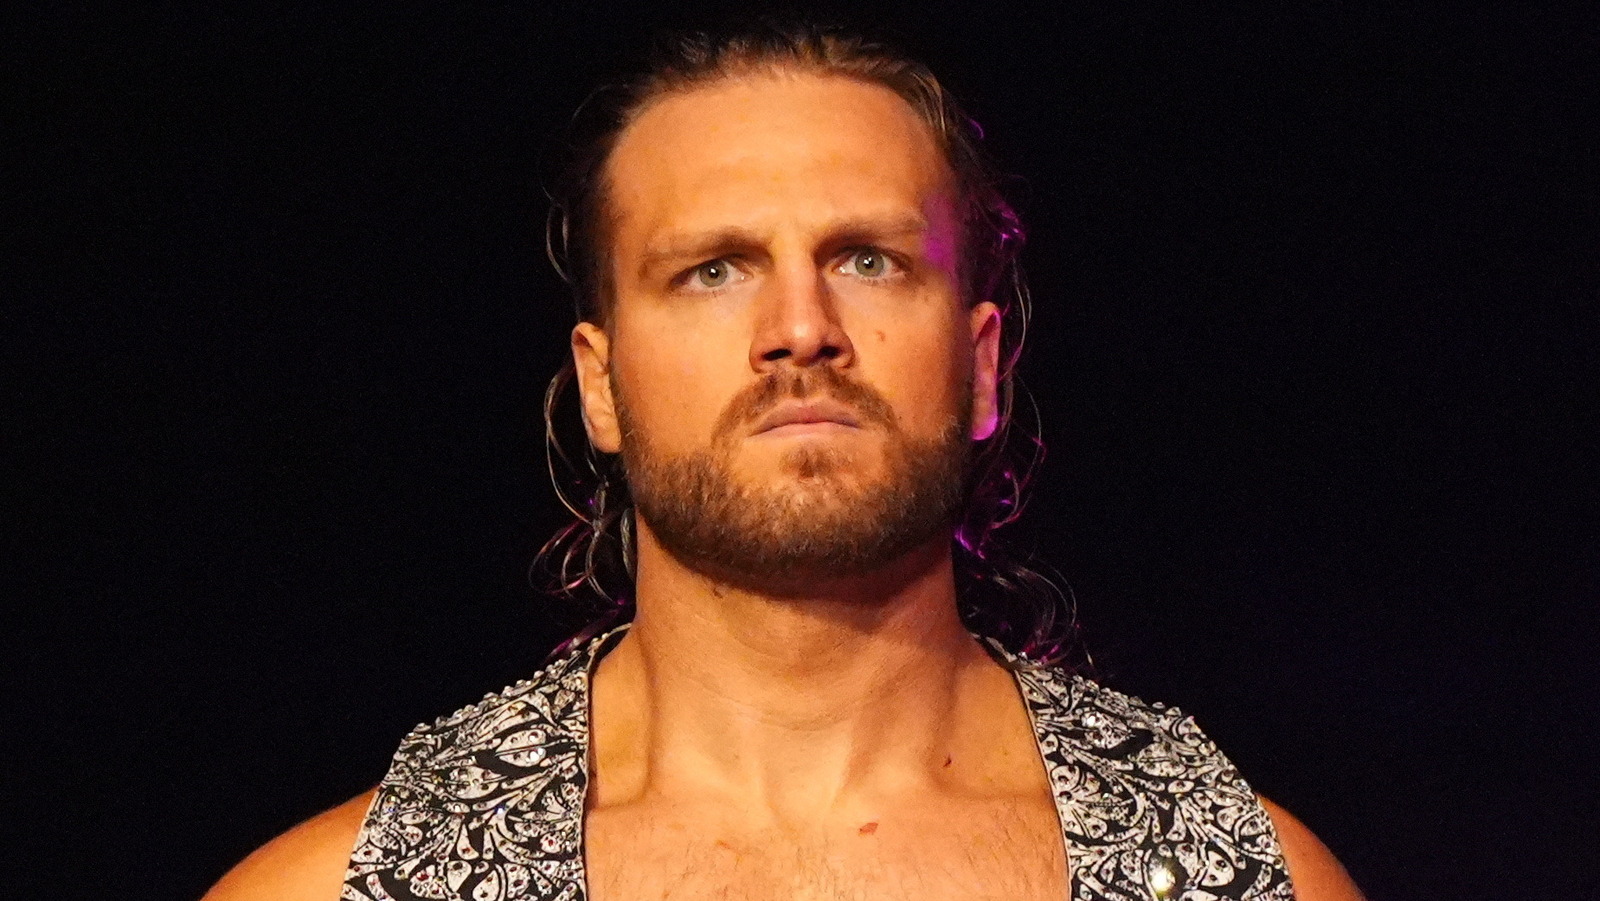 Hangman Adam Page Takes Aim At Old & Retired Wrestlers With Podcasts